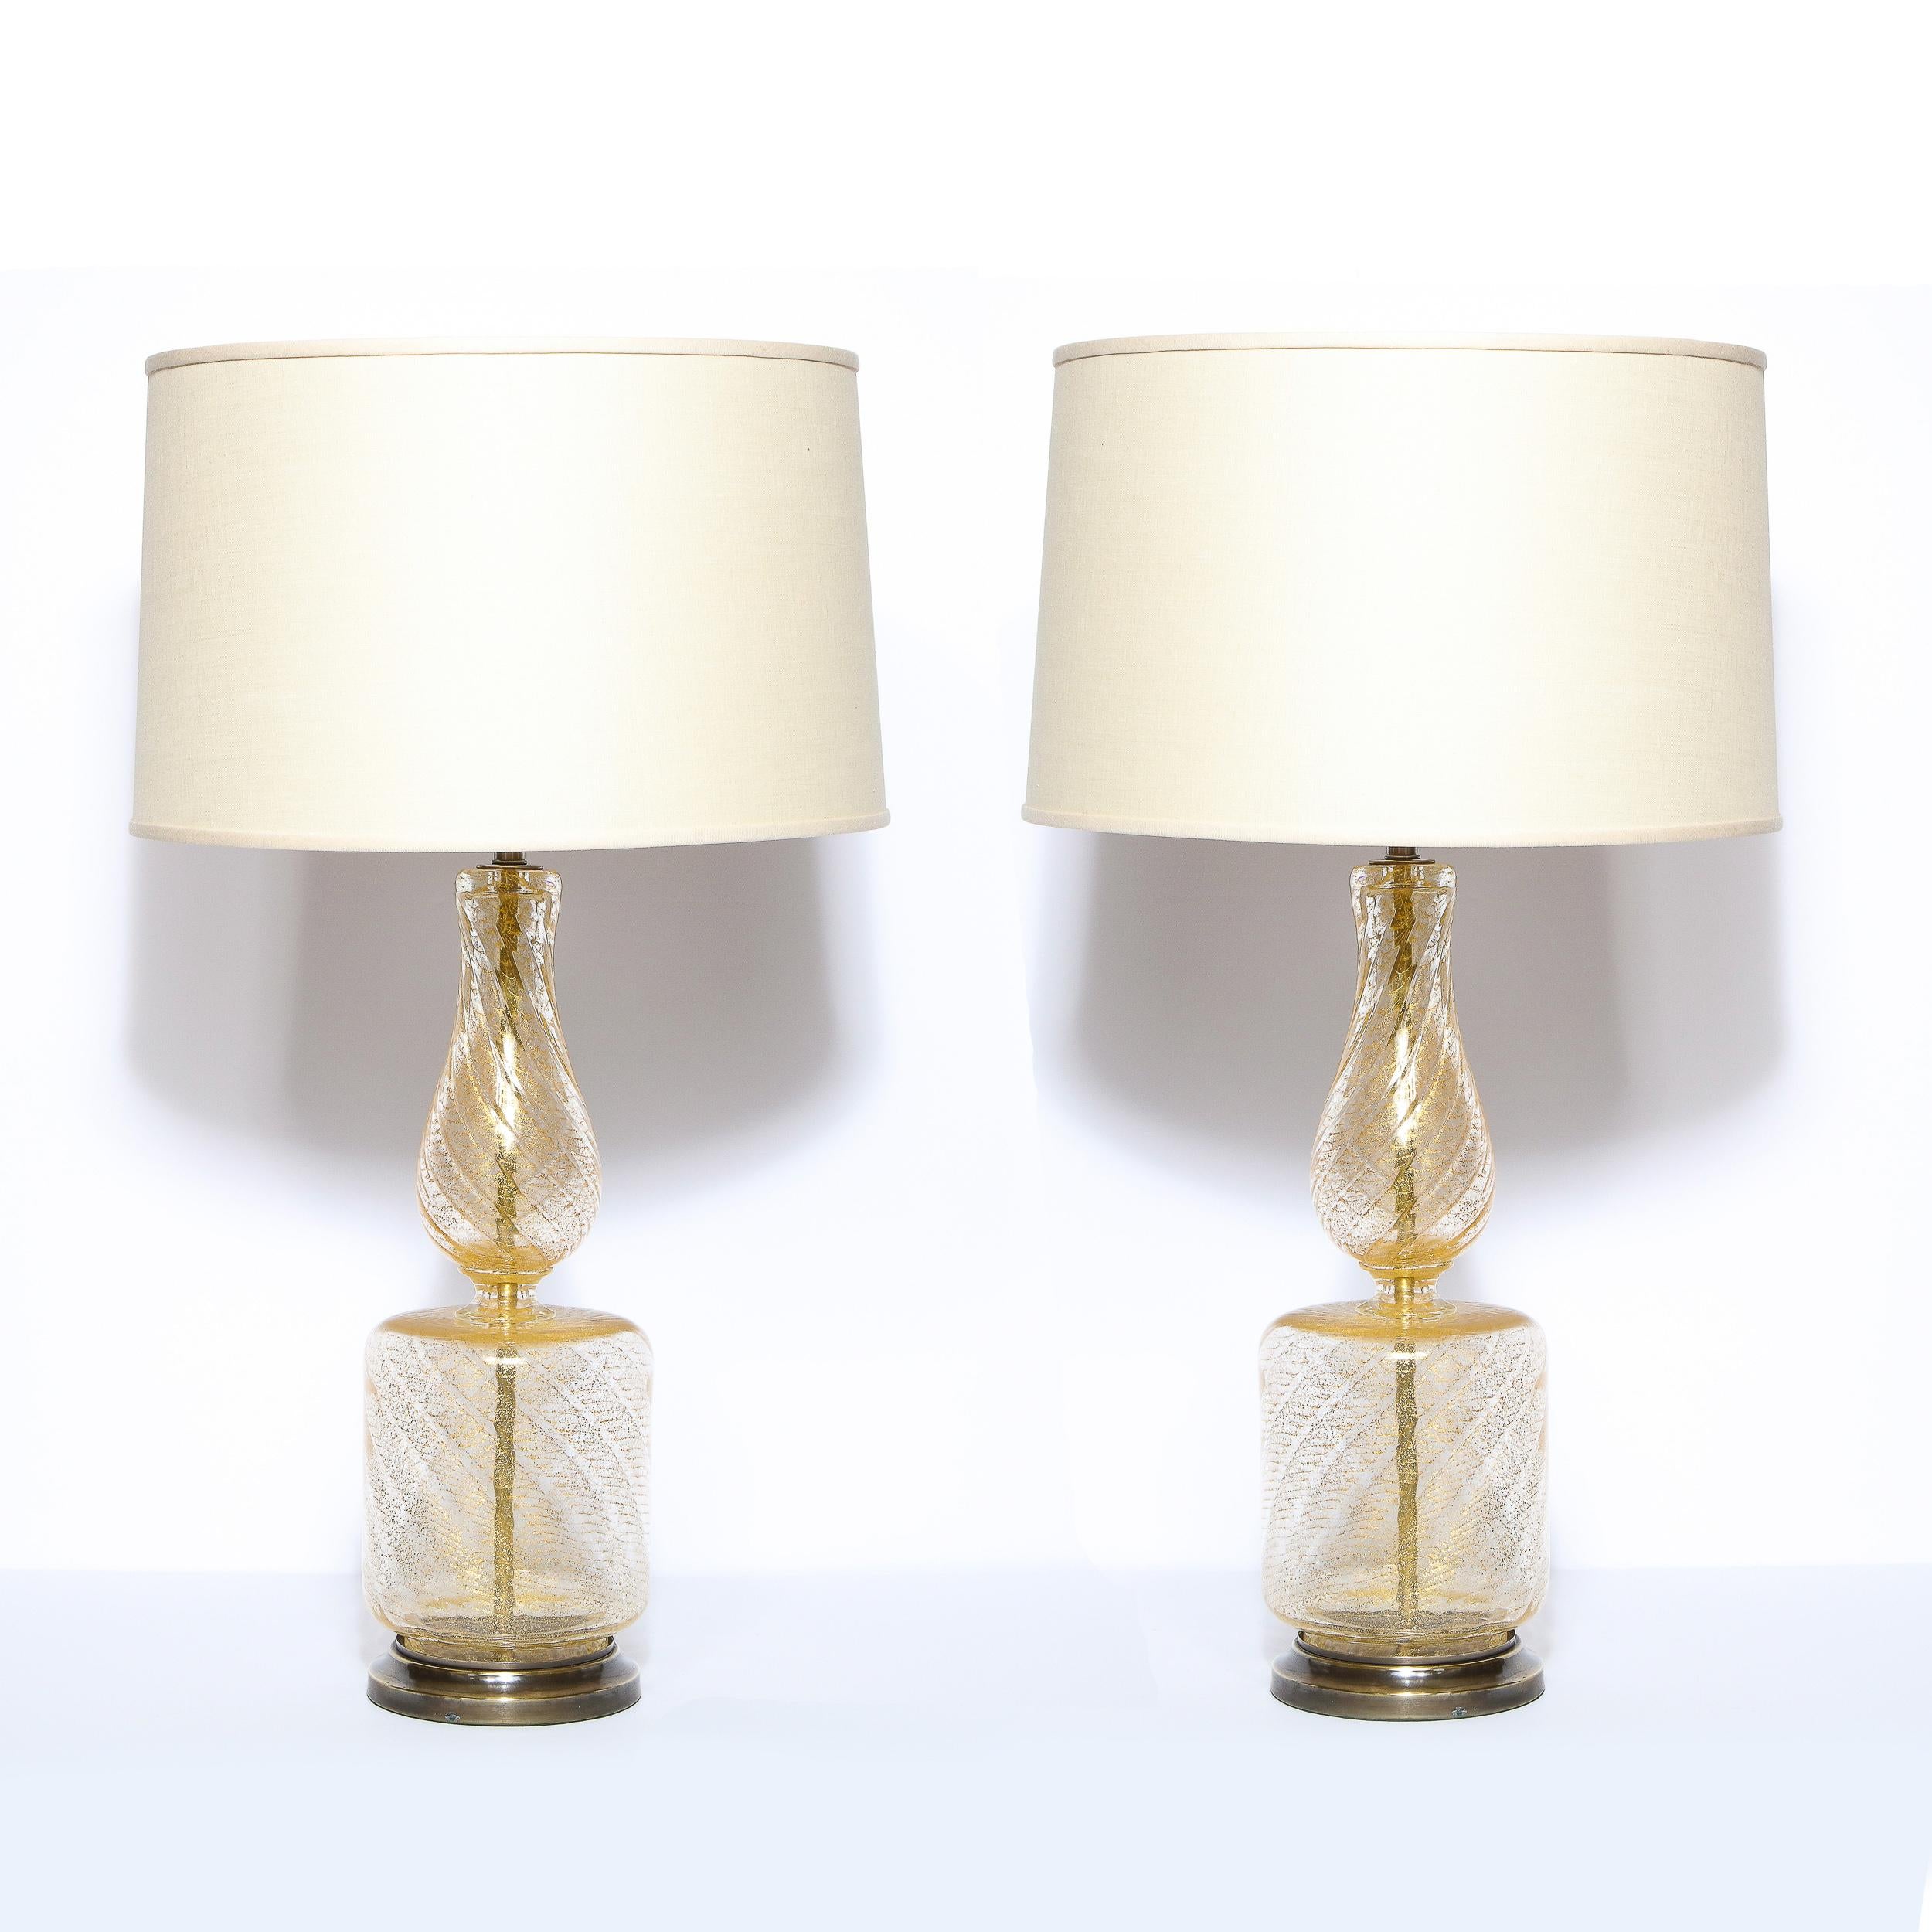 Pair of Mid Century Glass Table Lamps with 24kt Yellow Gold Flecks & Brass Bases 1